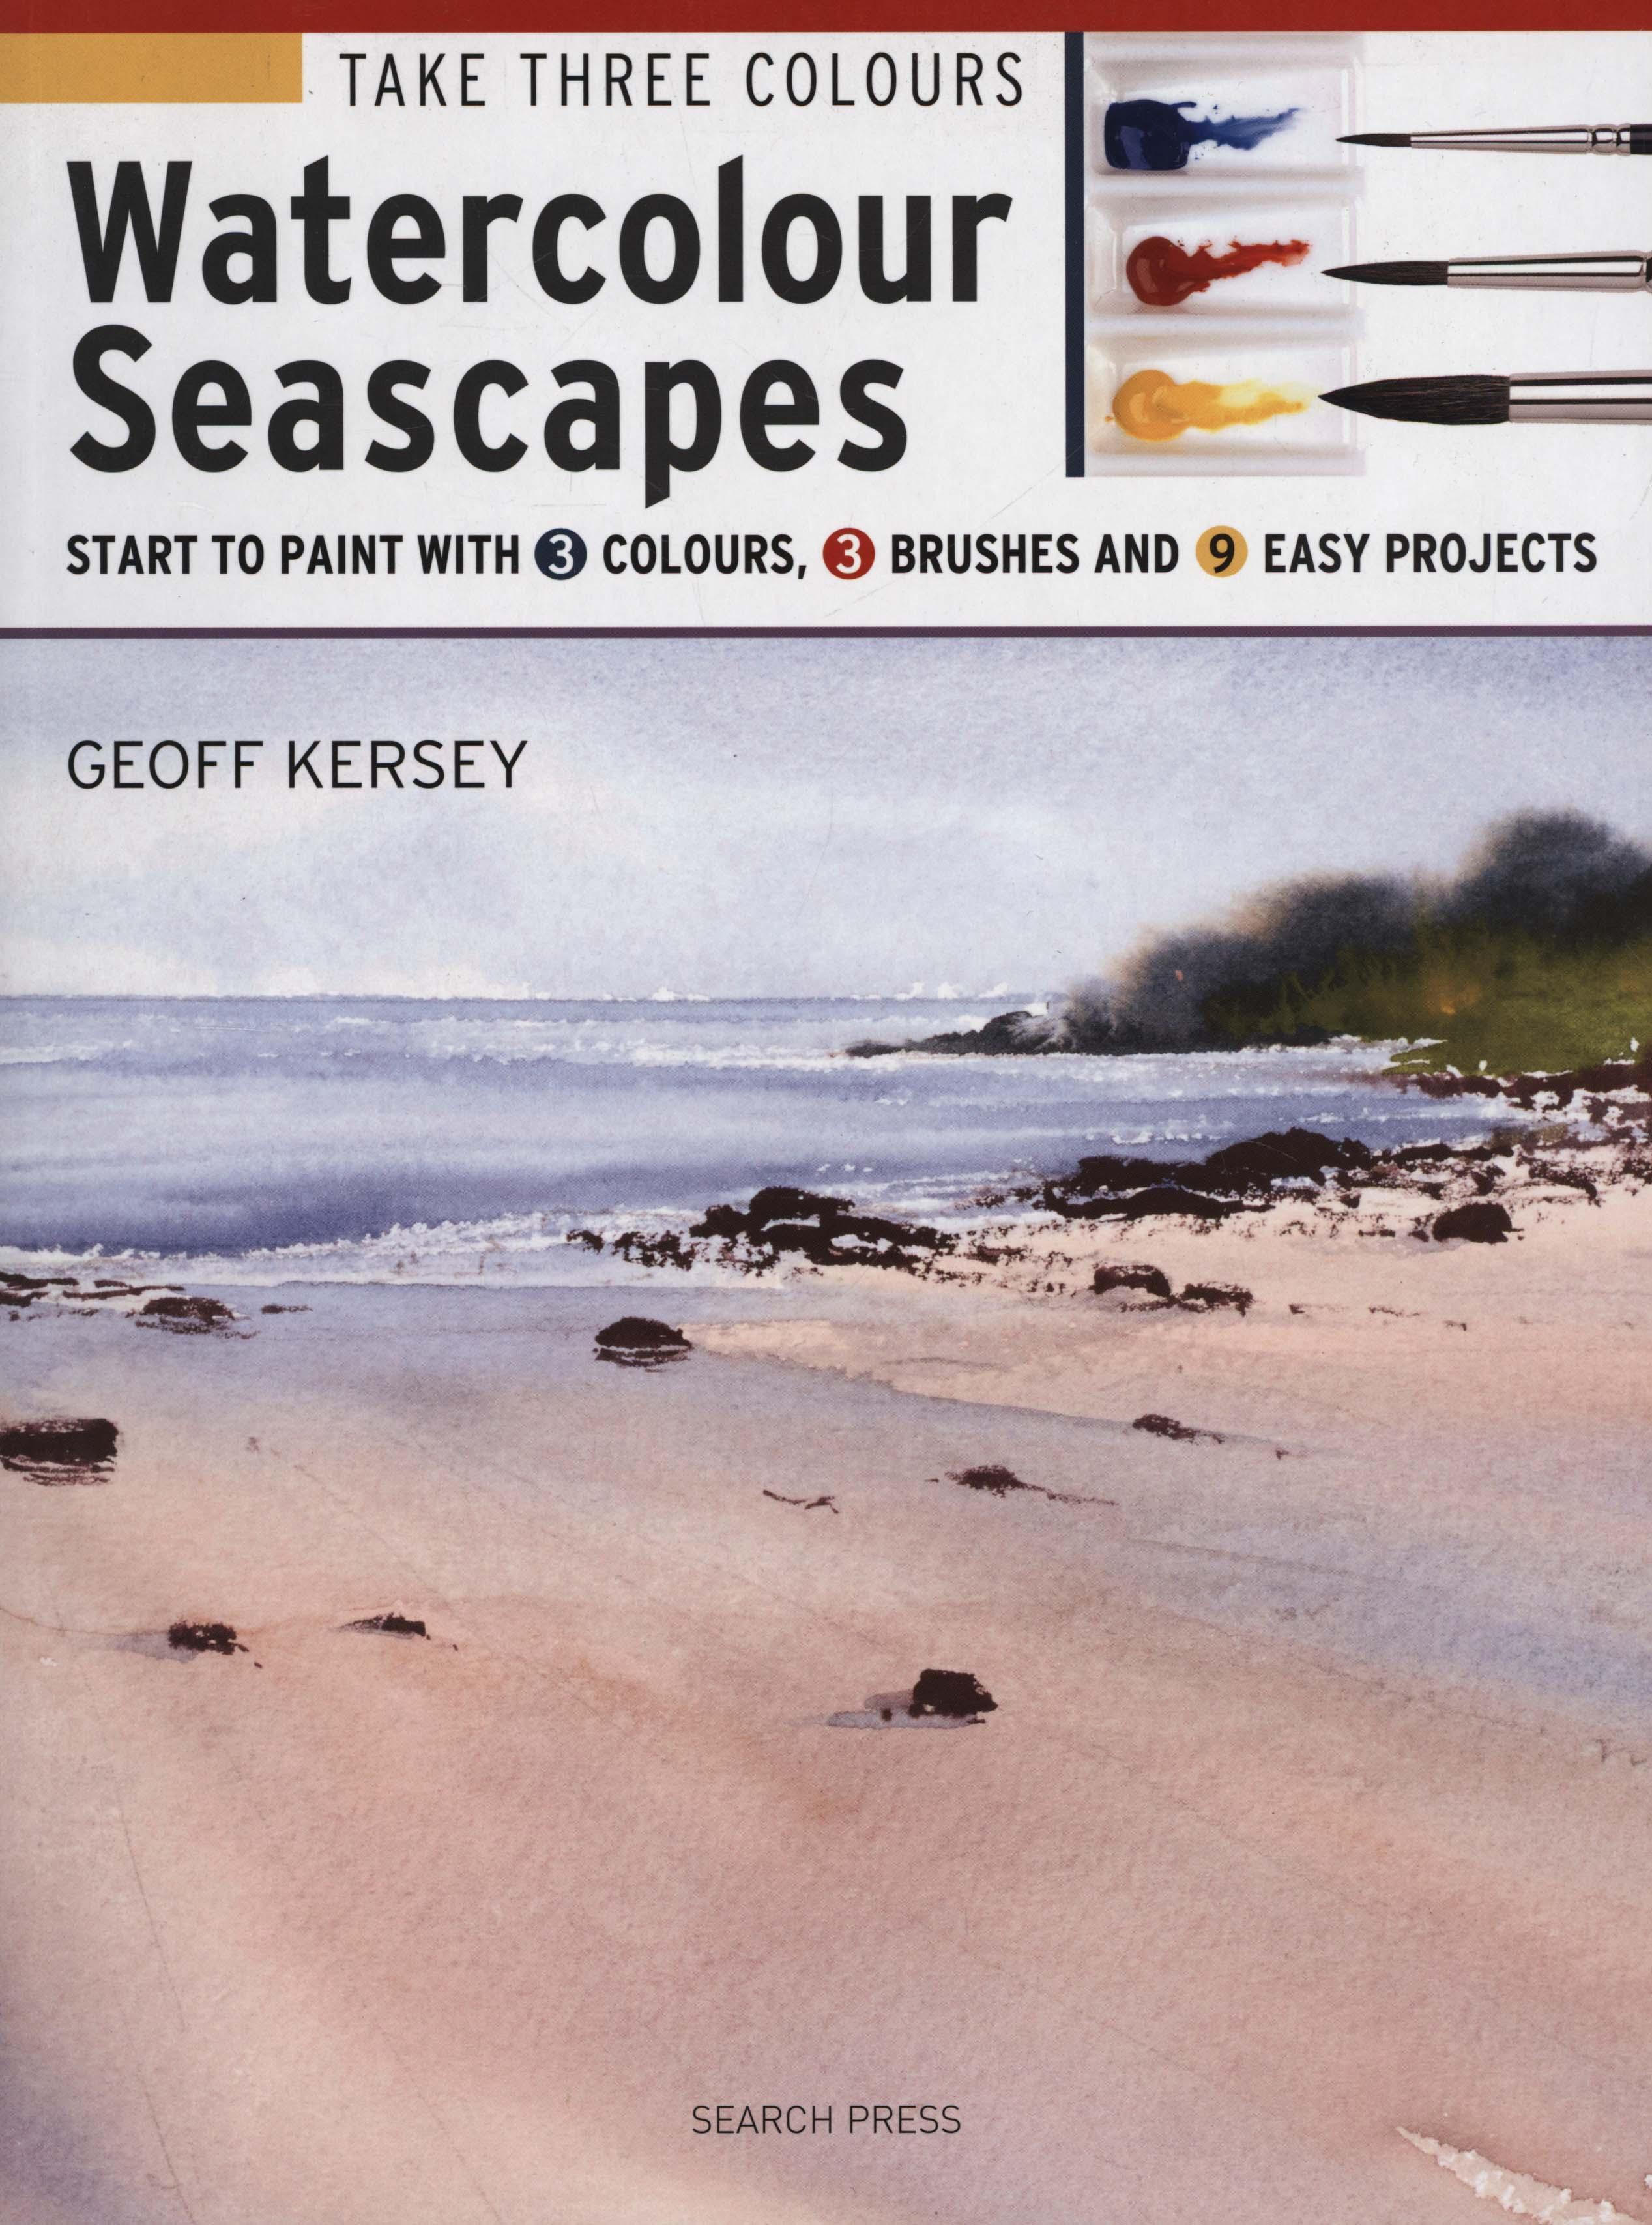 Take Three Colours: Watercolour Seascapes - Geoff Kersey